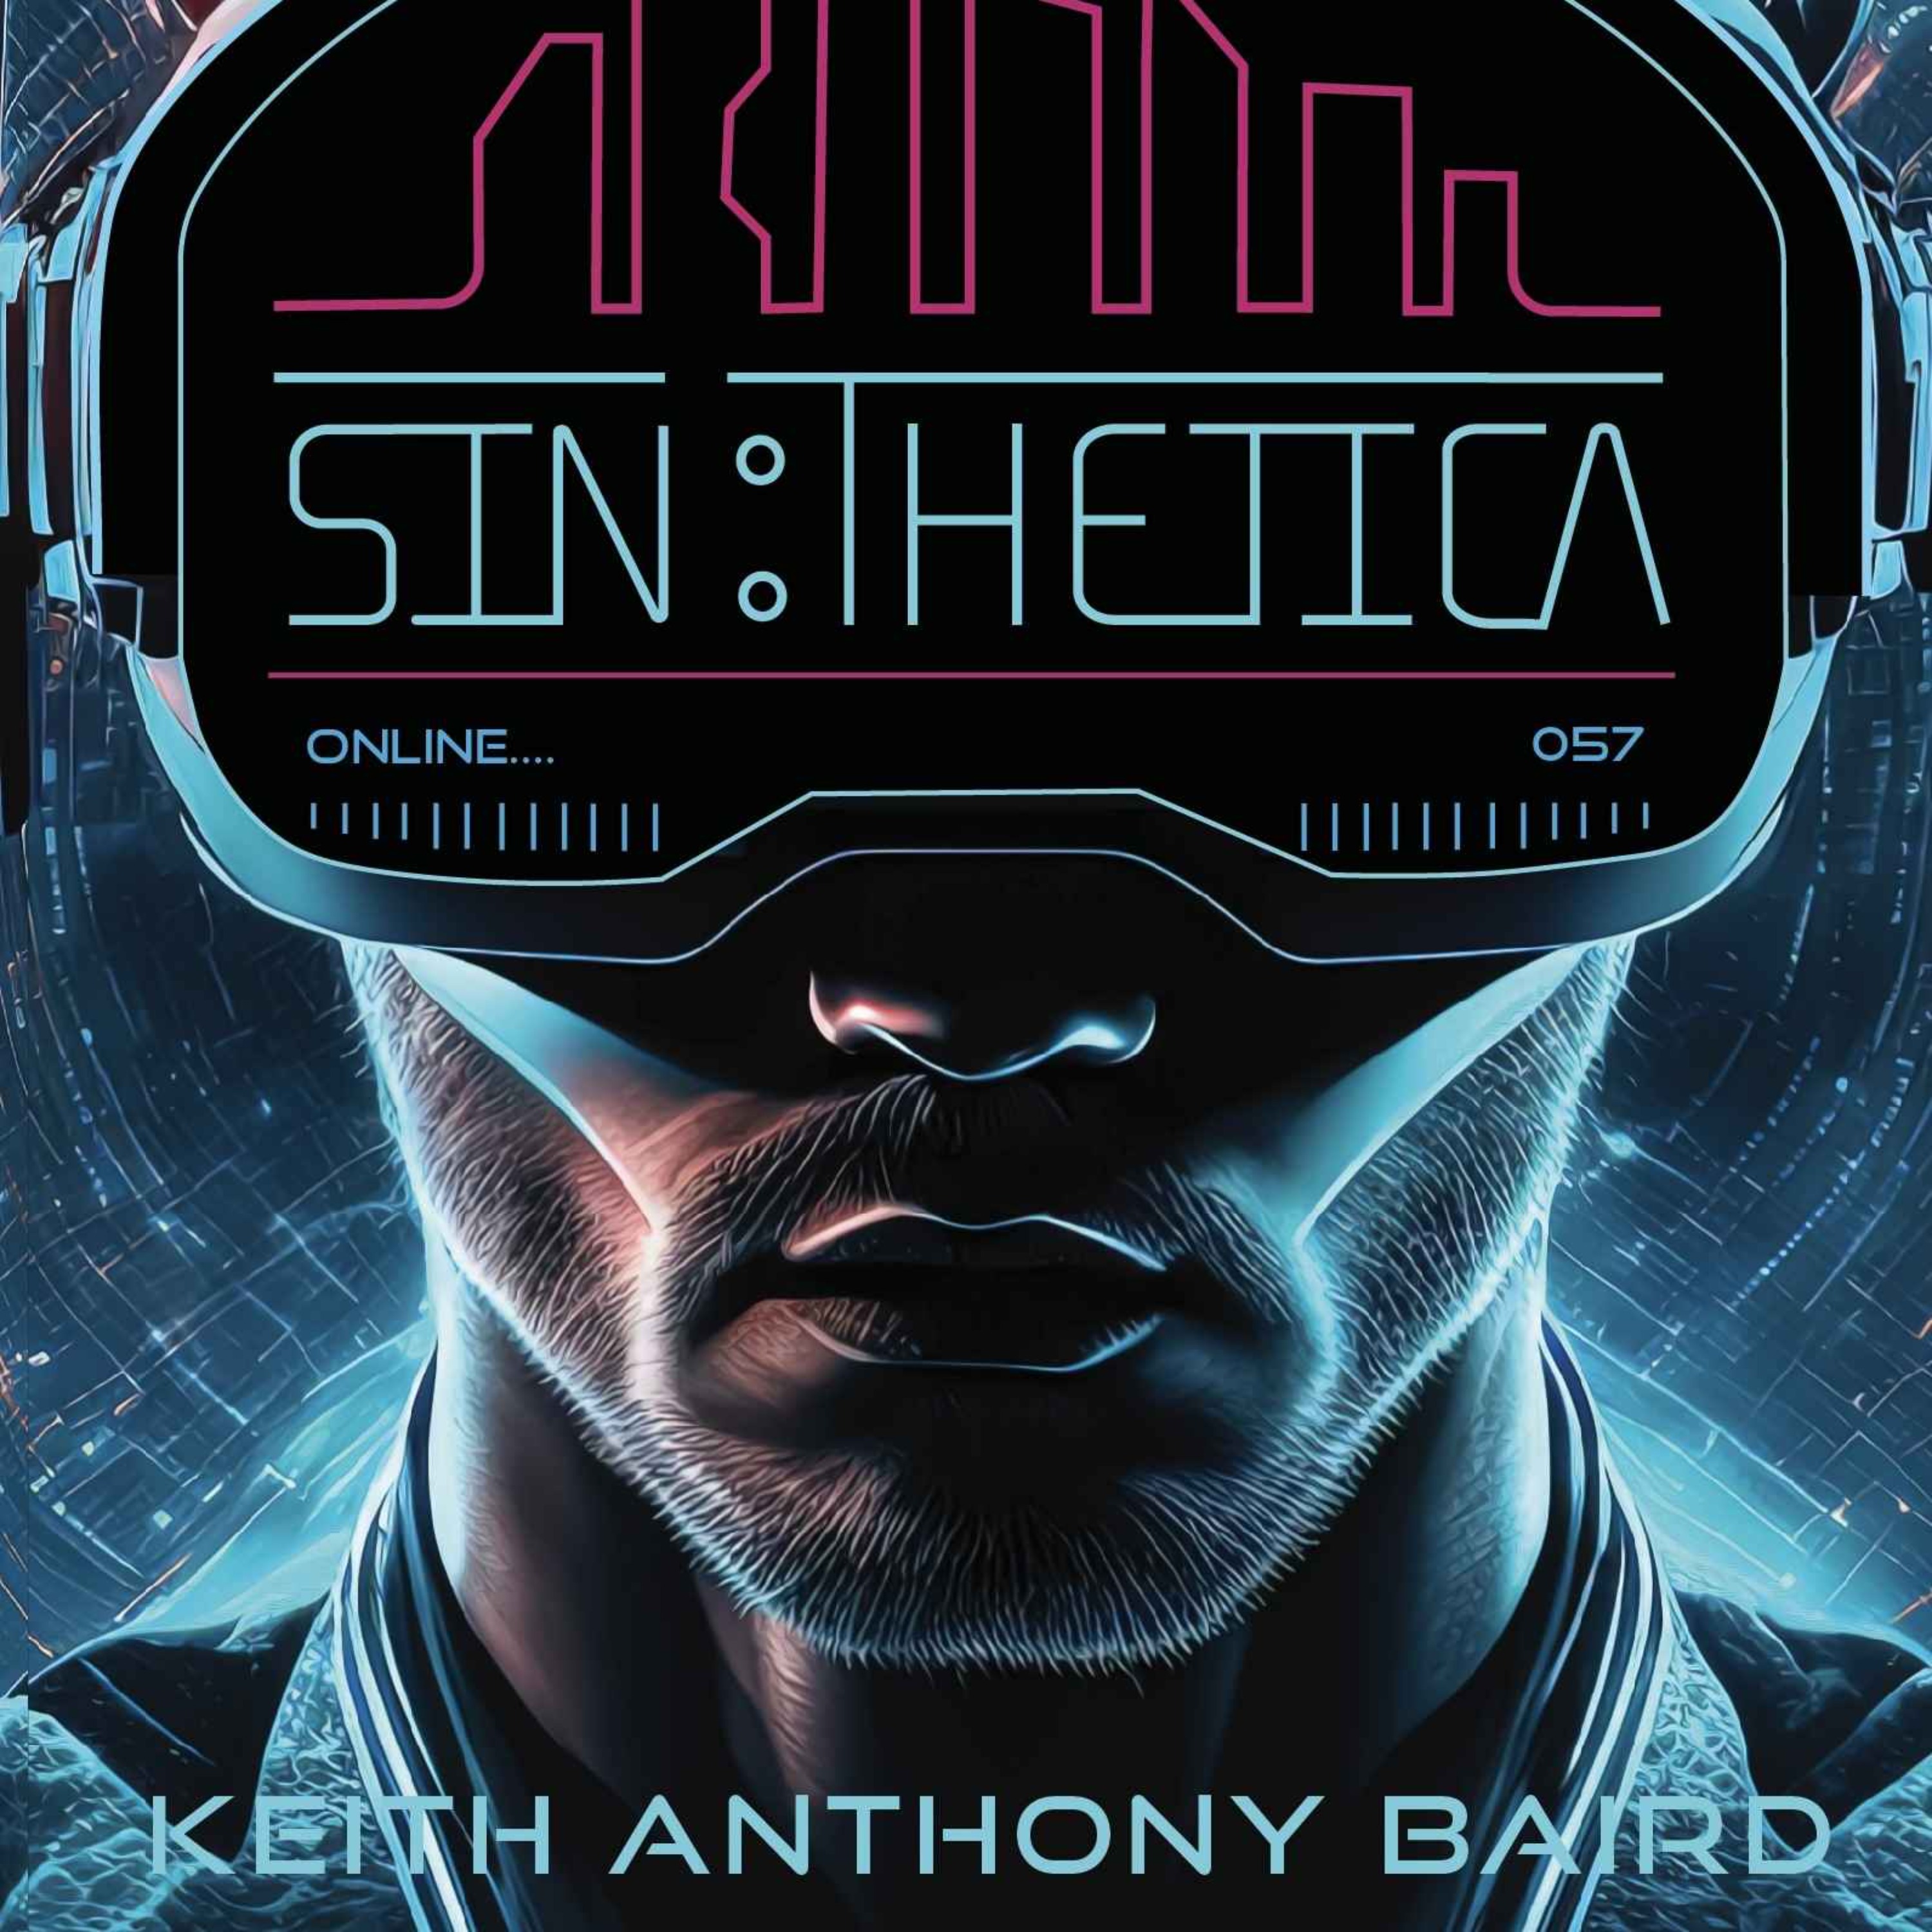 Keith Anthony Baird - Sin: thetica